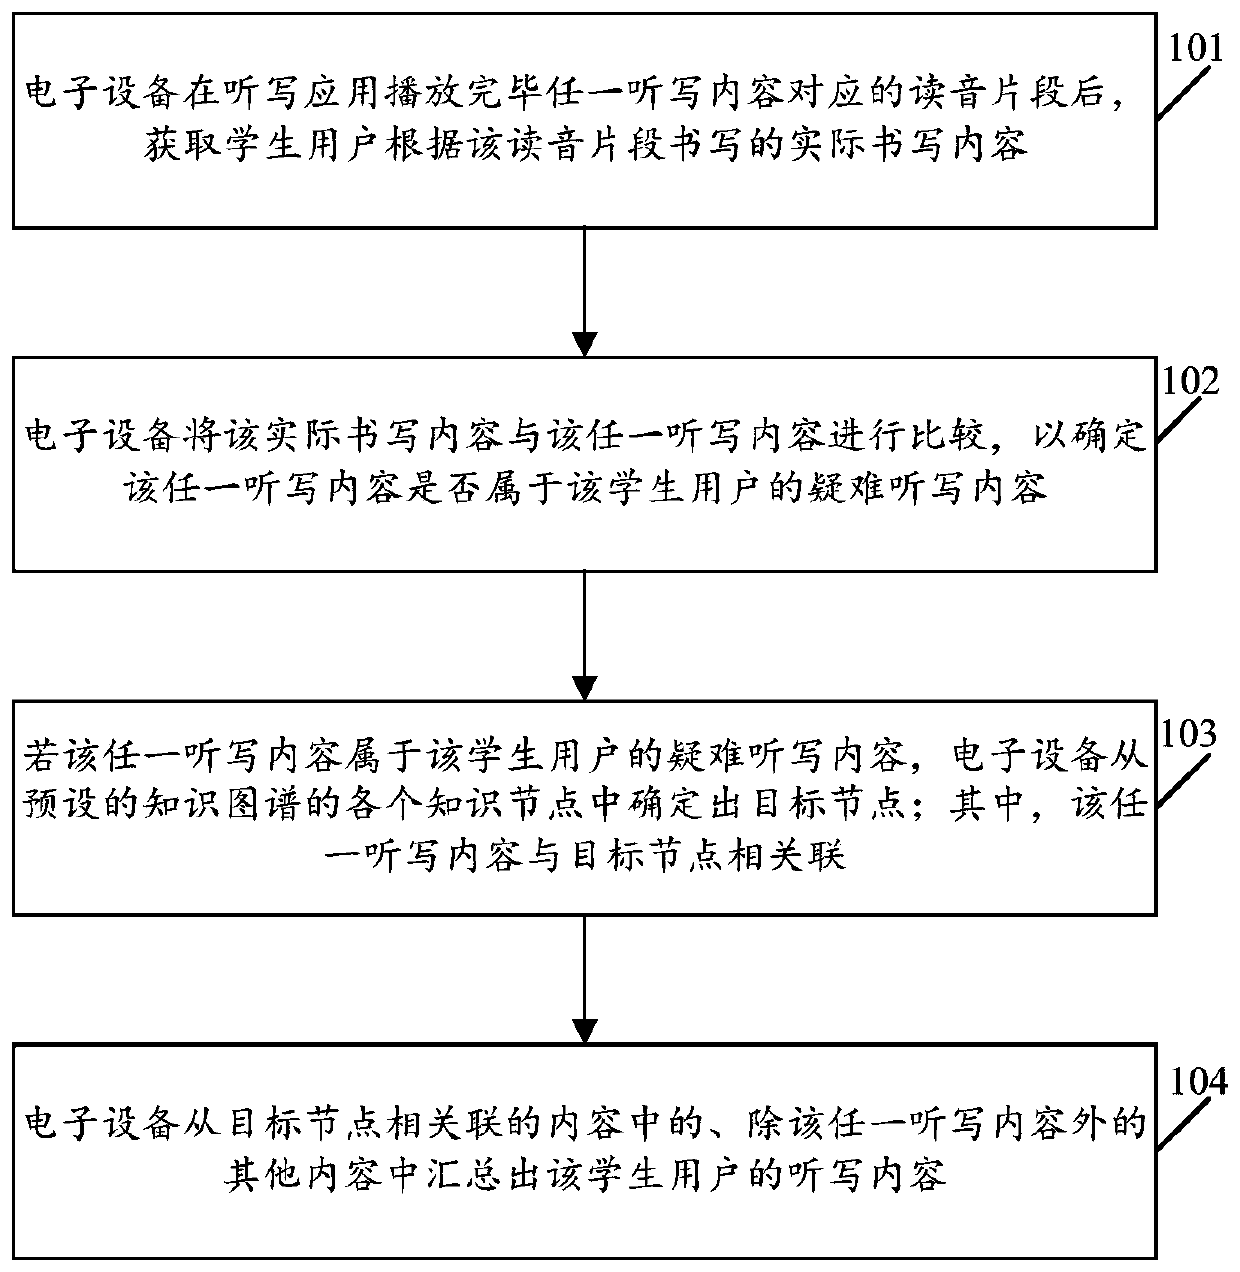 Dictation content obtaining method based on knowledge graph and electronic equipment